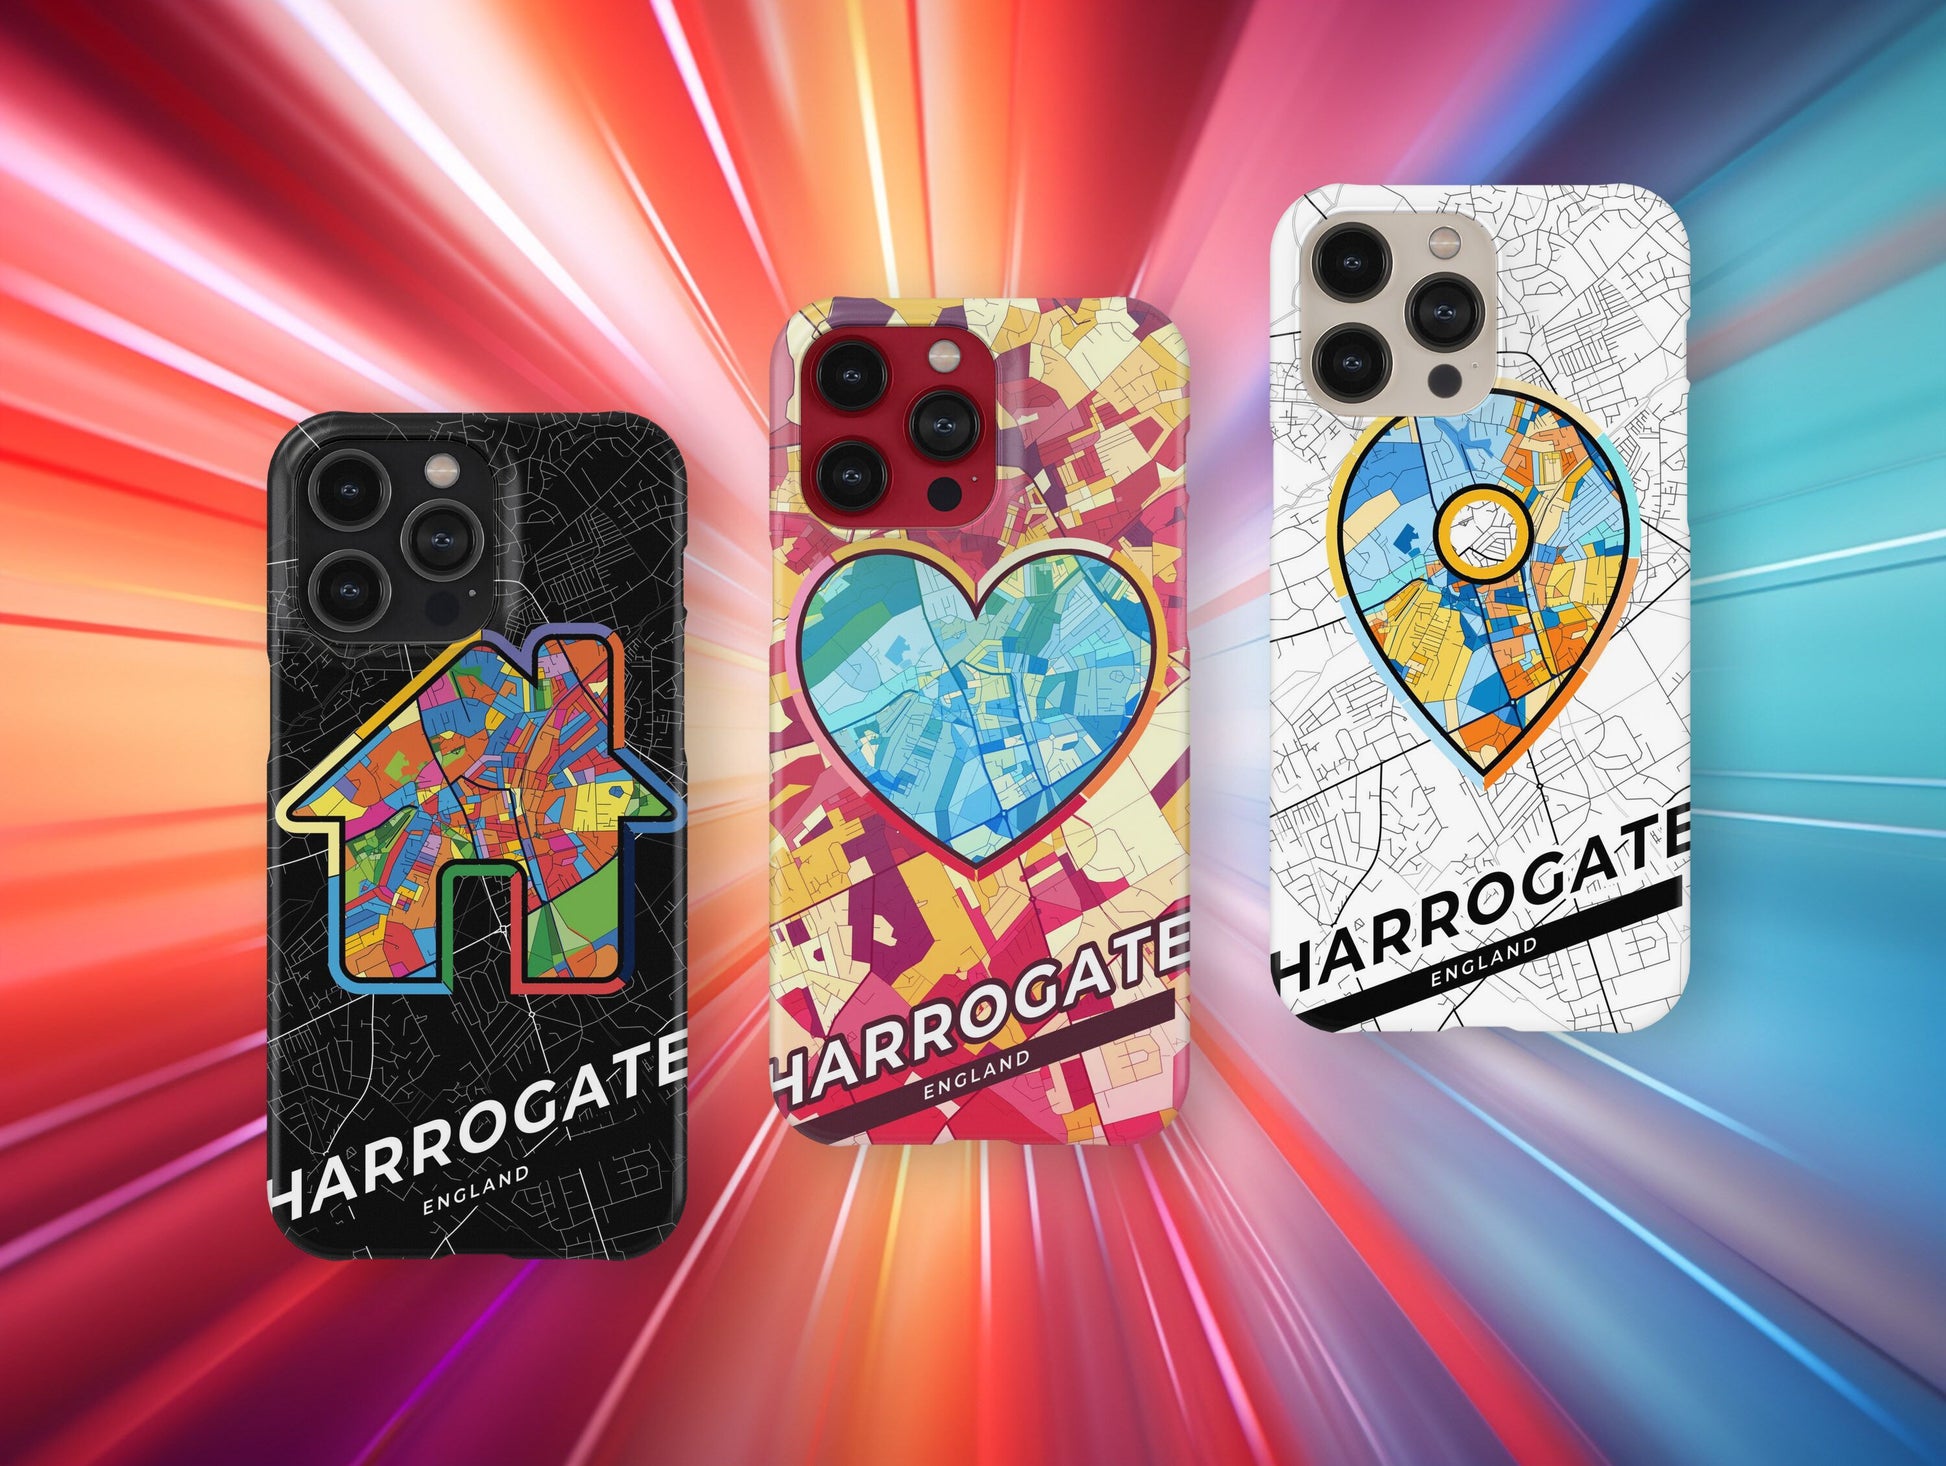 Harrogate England slim phone case with colorful icon. Birthday, wedding or housewarming gift. Couple match cases.